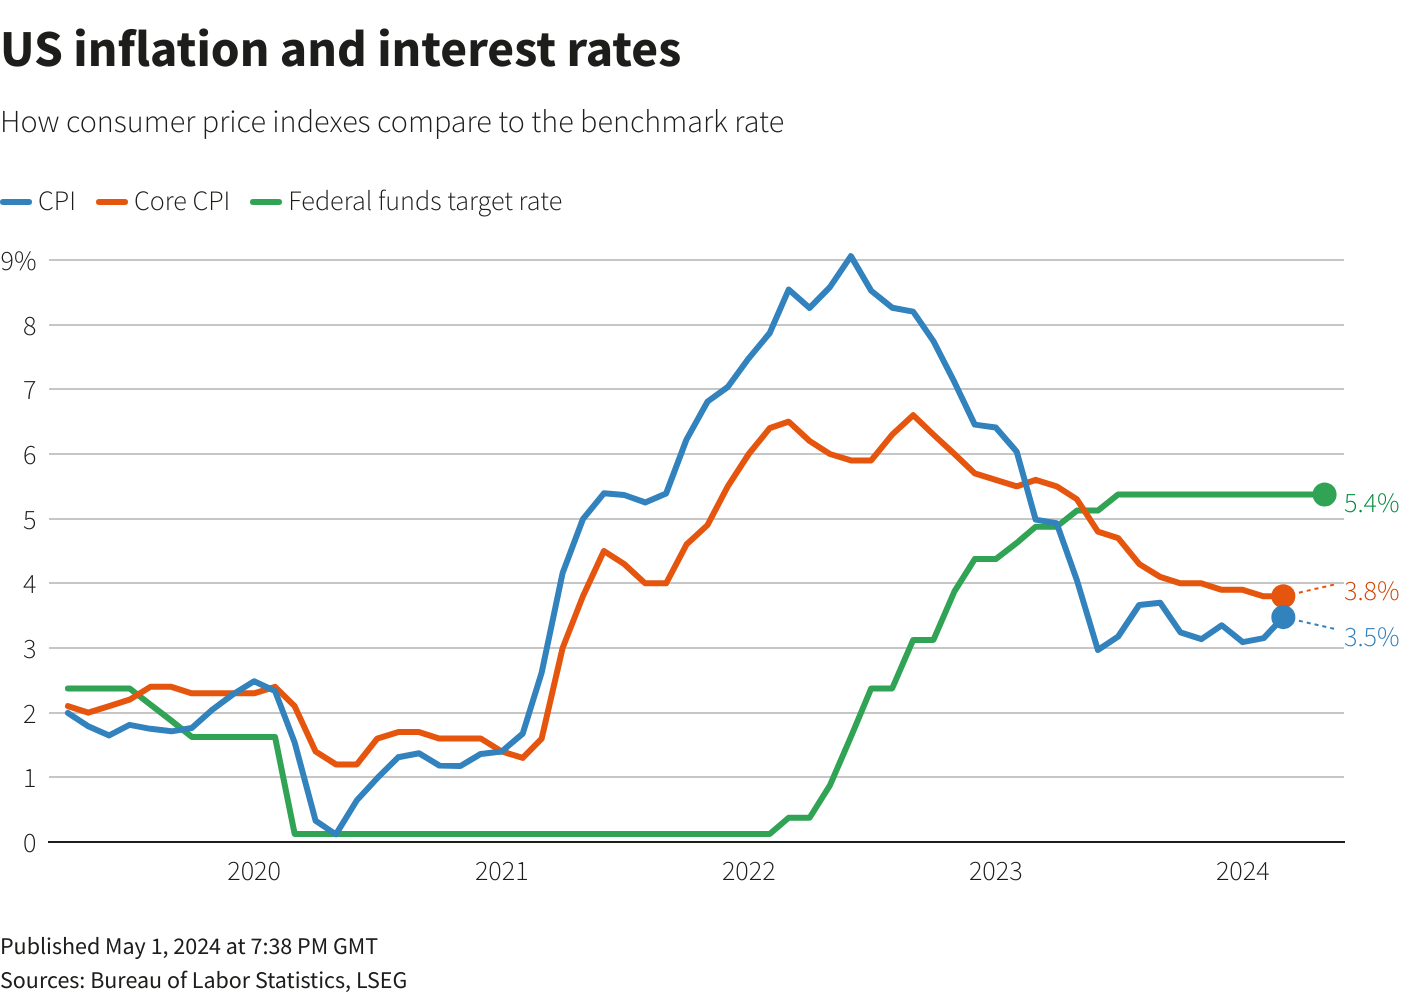 US inflation and interest rates